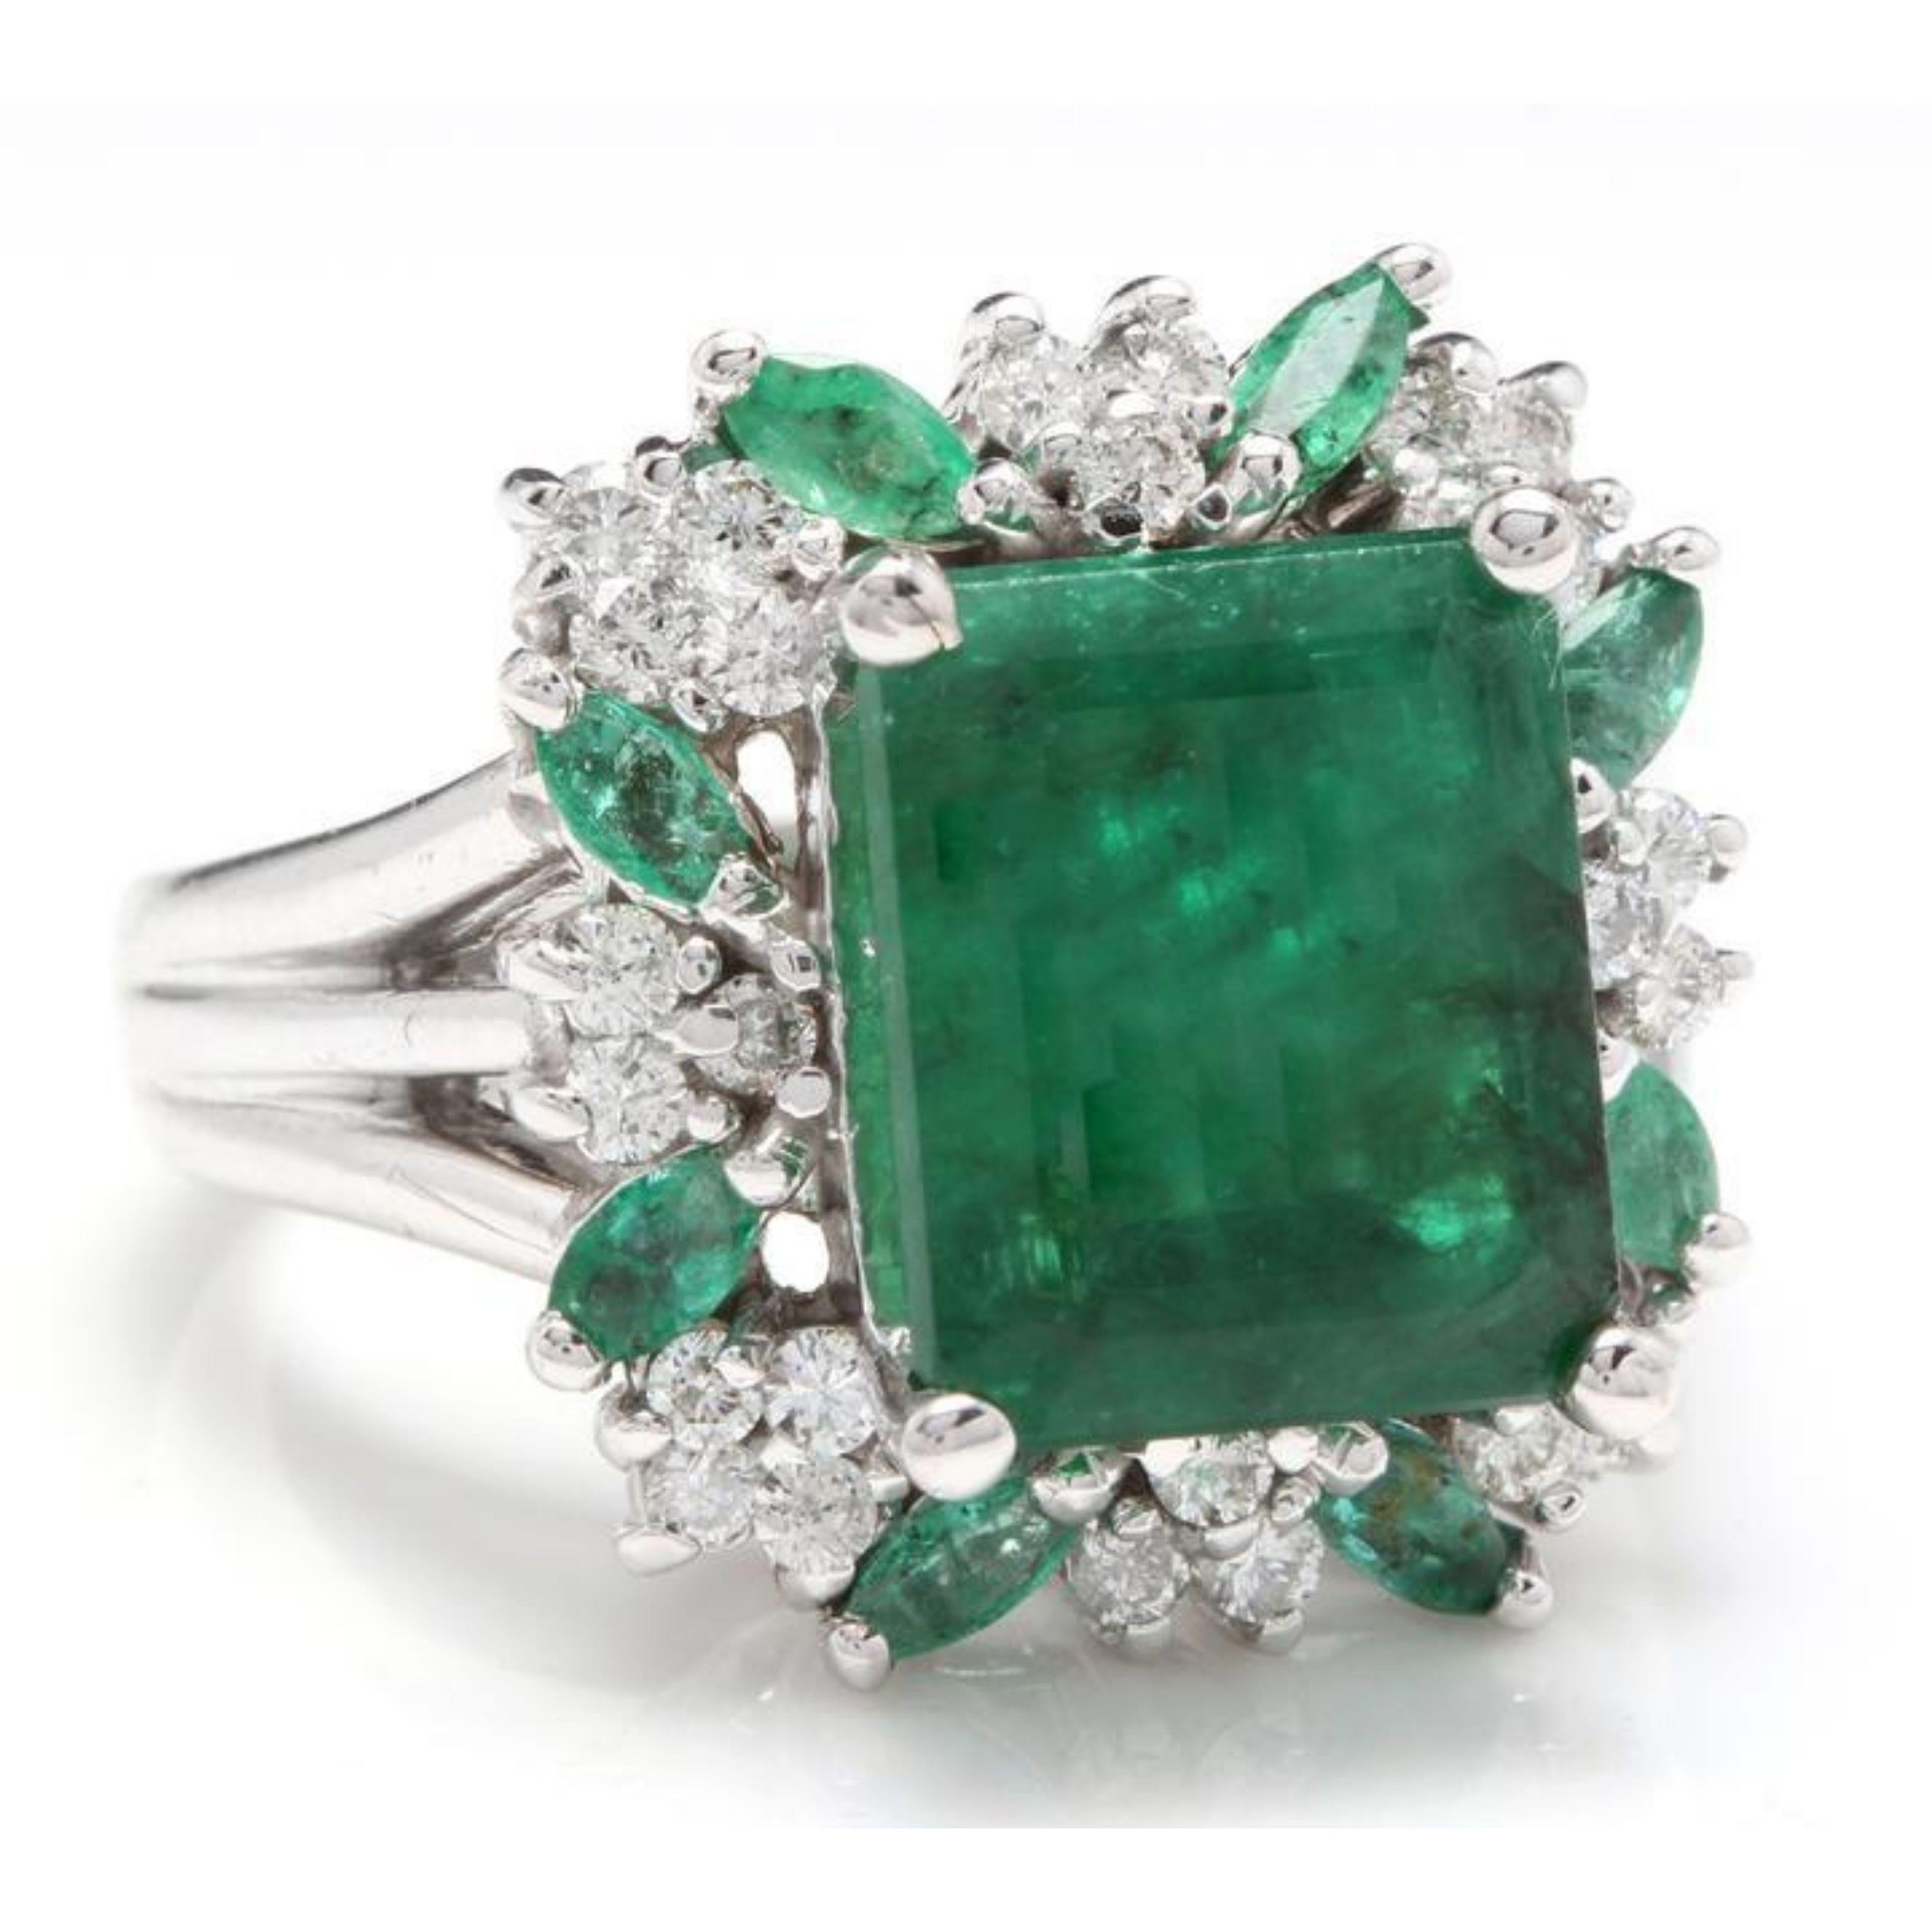 7.30 Carats Natural Emerald and Diamond 14K Solid White Gold Ring

Total Natural Green Emeralds Weight is: Approx. 6.30 Carats (transparent)

Center Emerald Cut Emerald Weight is: Approx. 5.00Ct (transparent)

Emerald Treatment: Oiling

Total Side